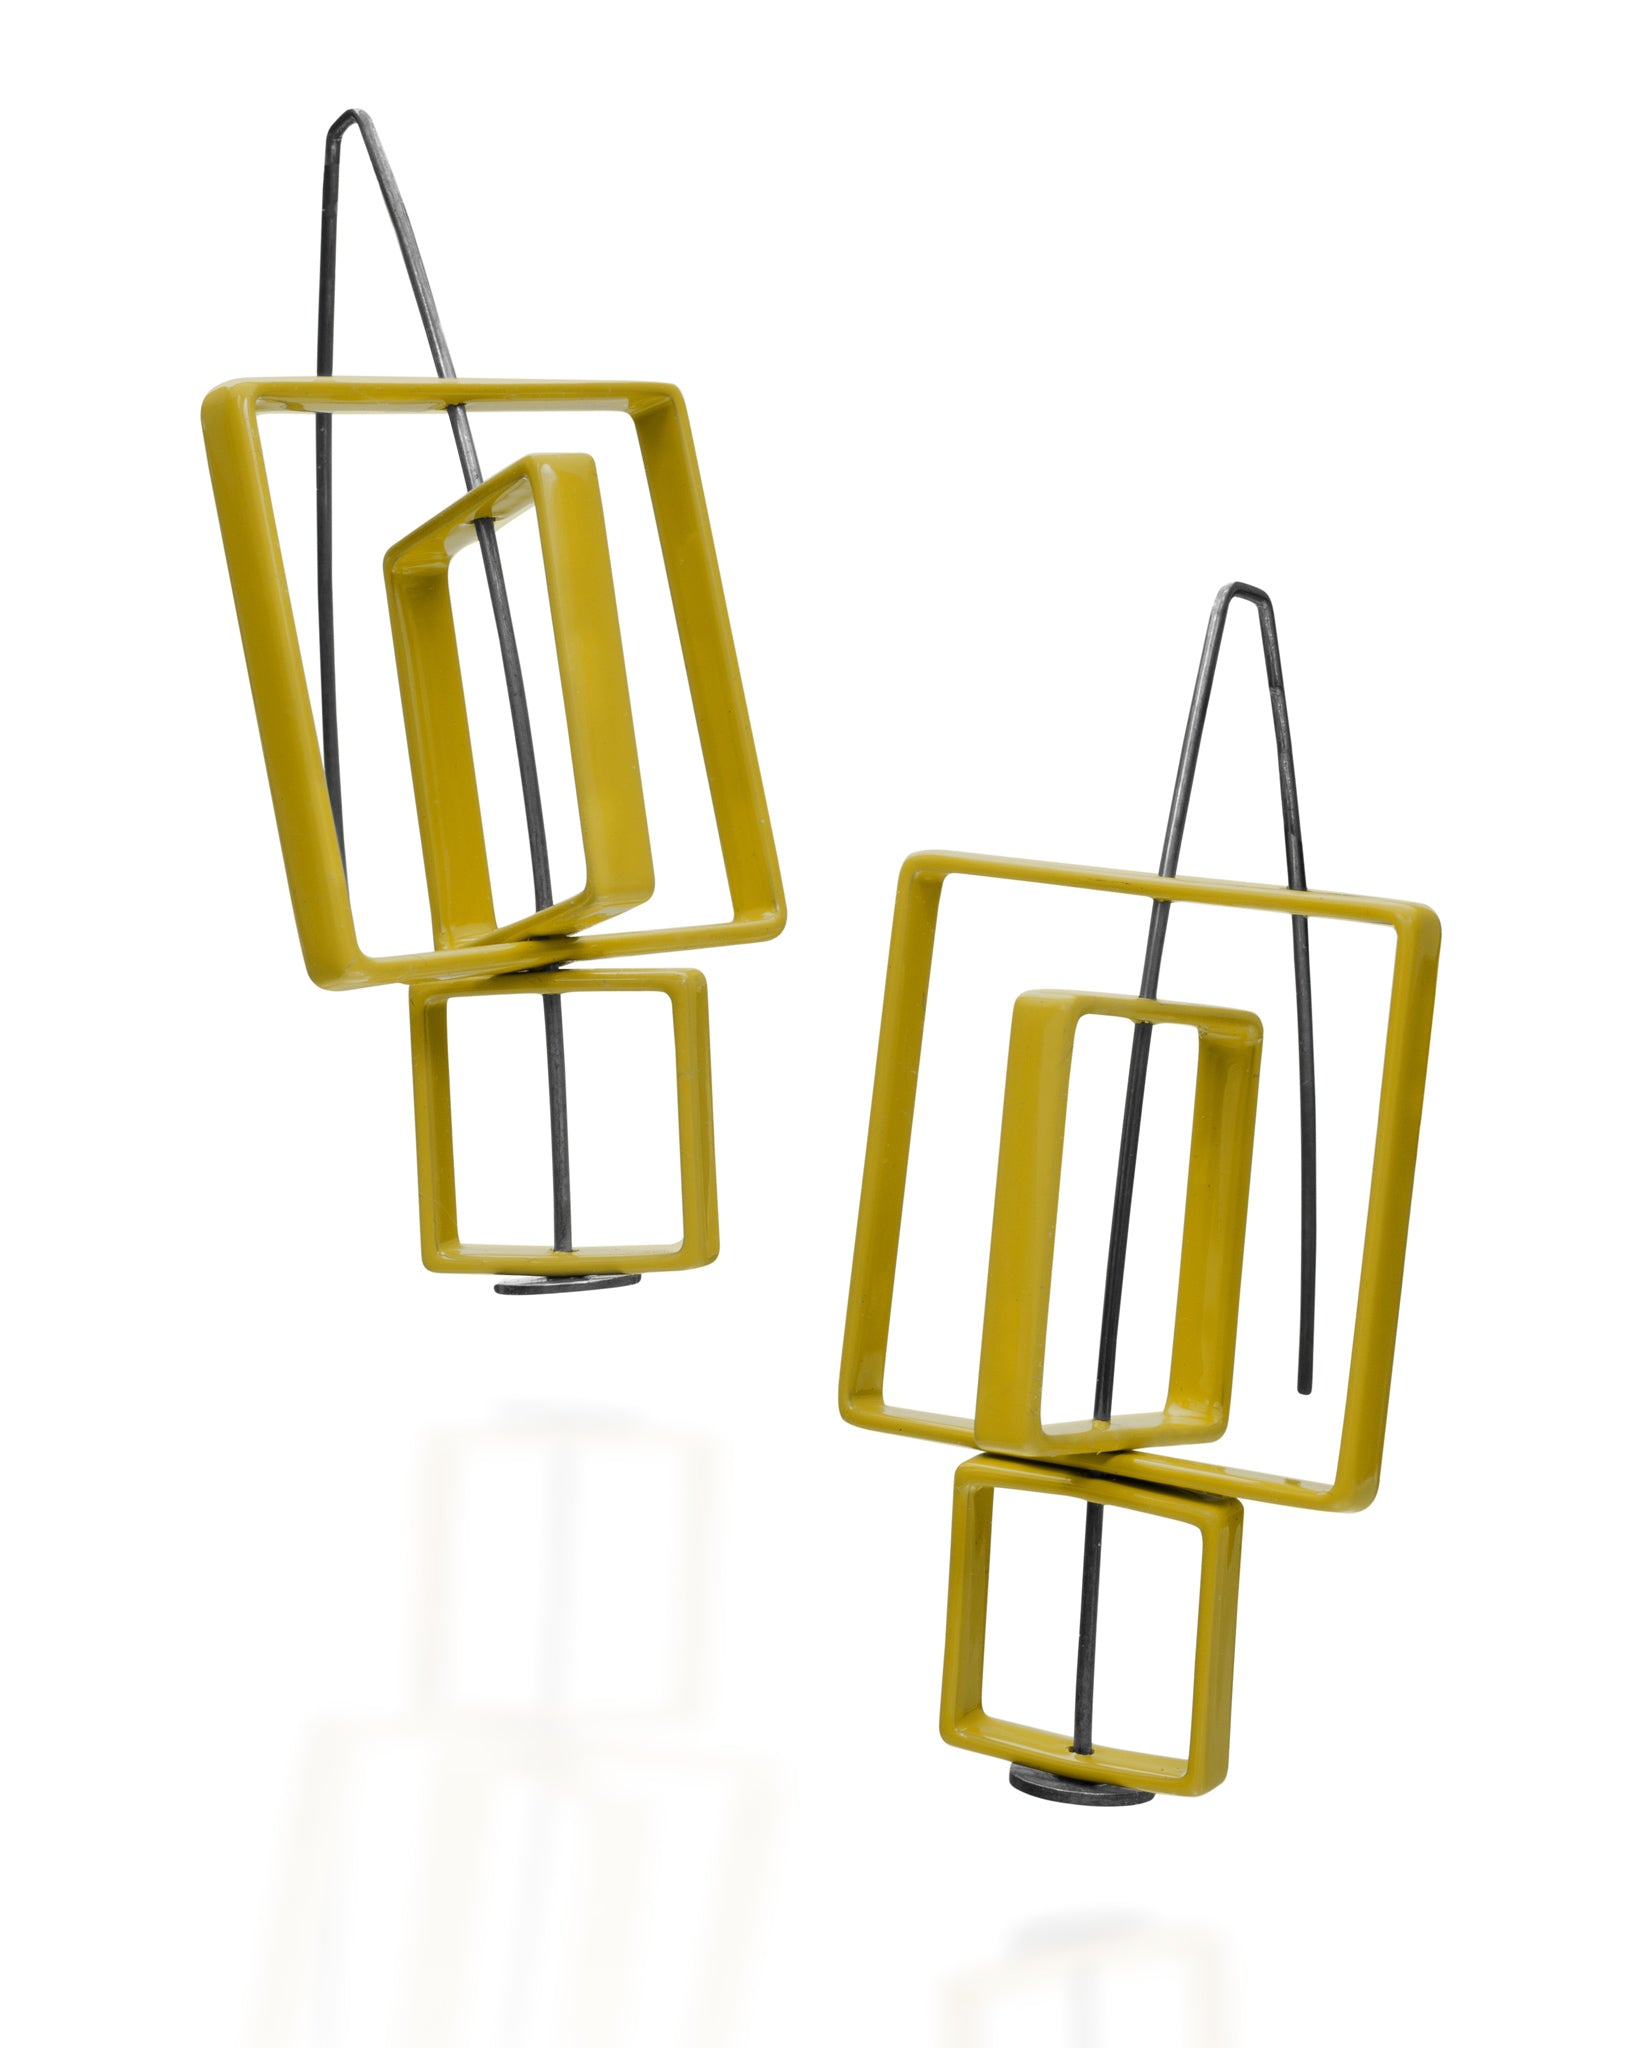 Moveable Solid Color 3 Square Earrings